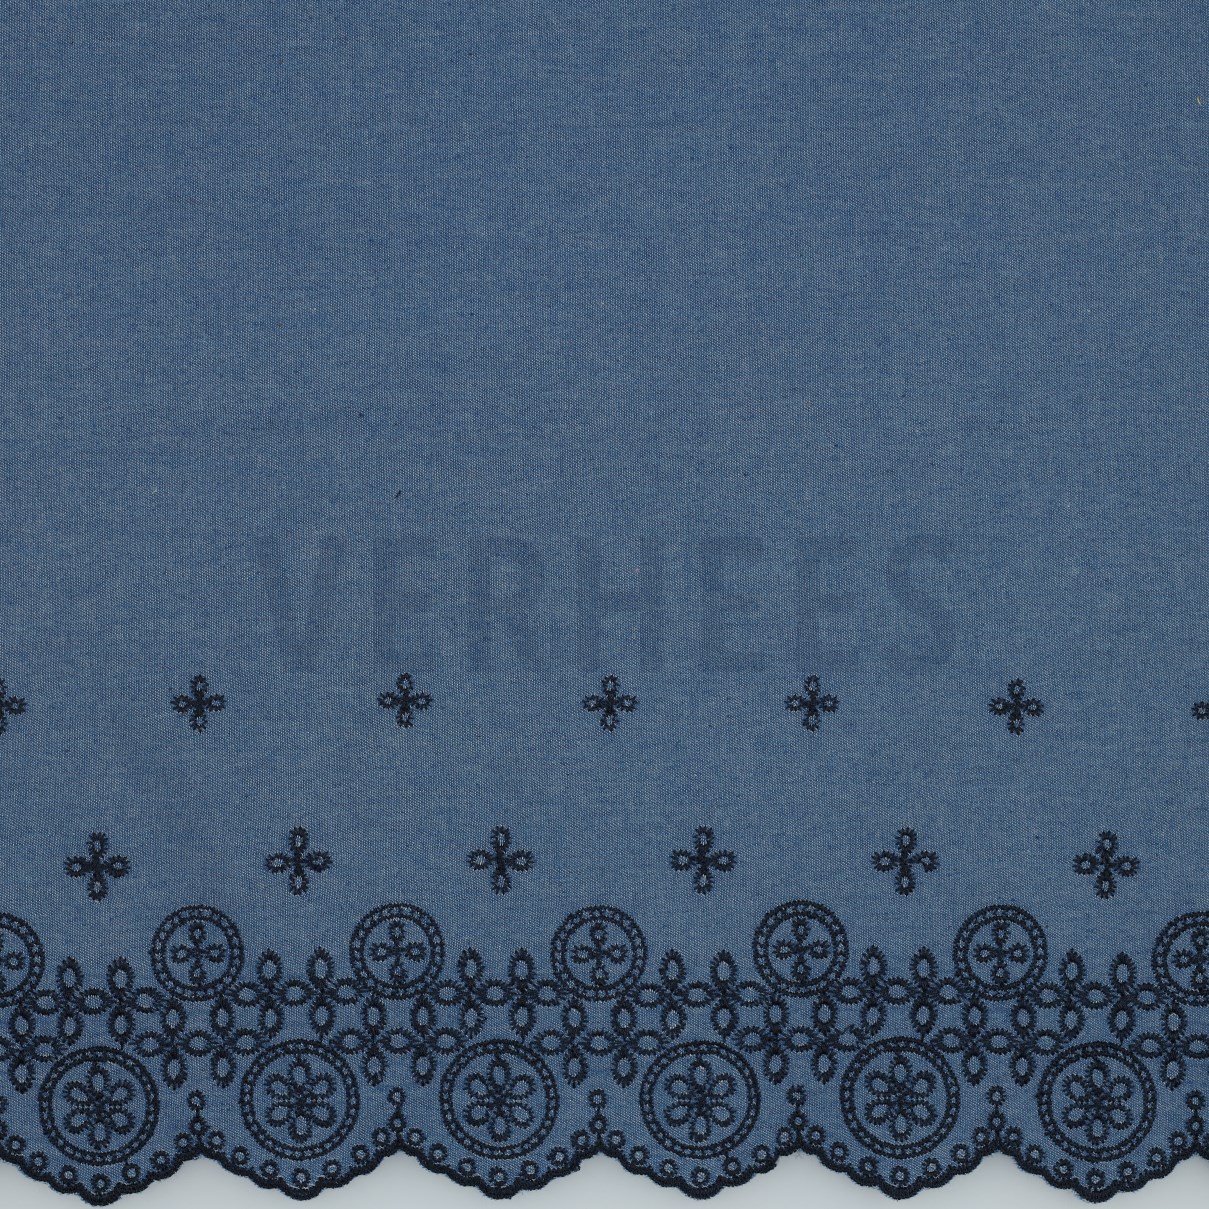 JEANS BORDER EMBROIDERY JEANS (high resolution)